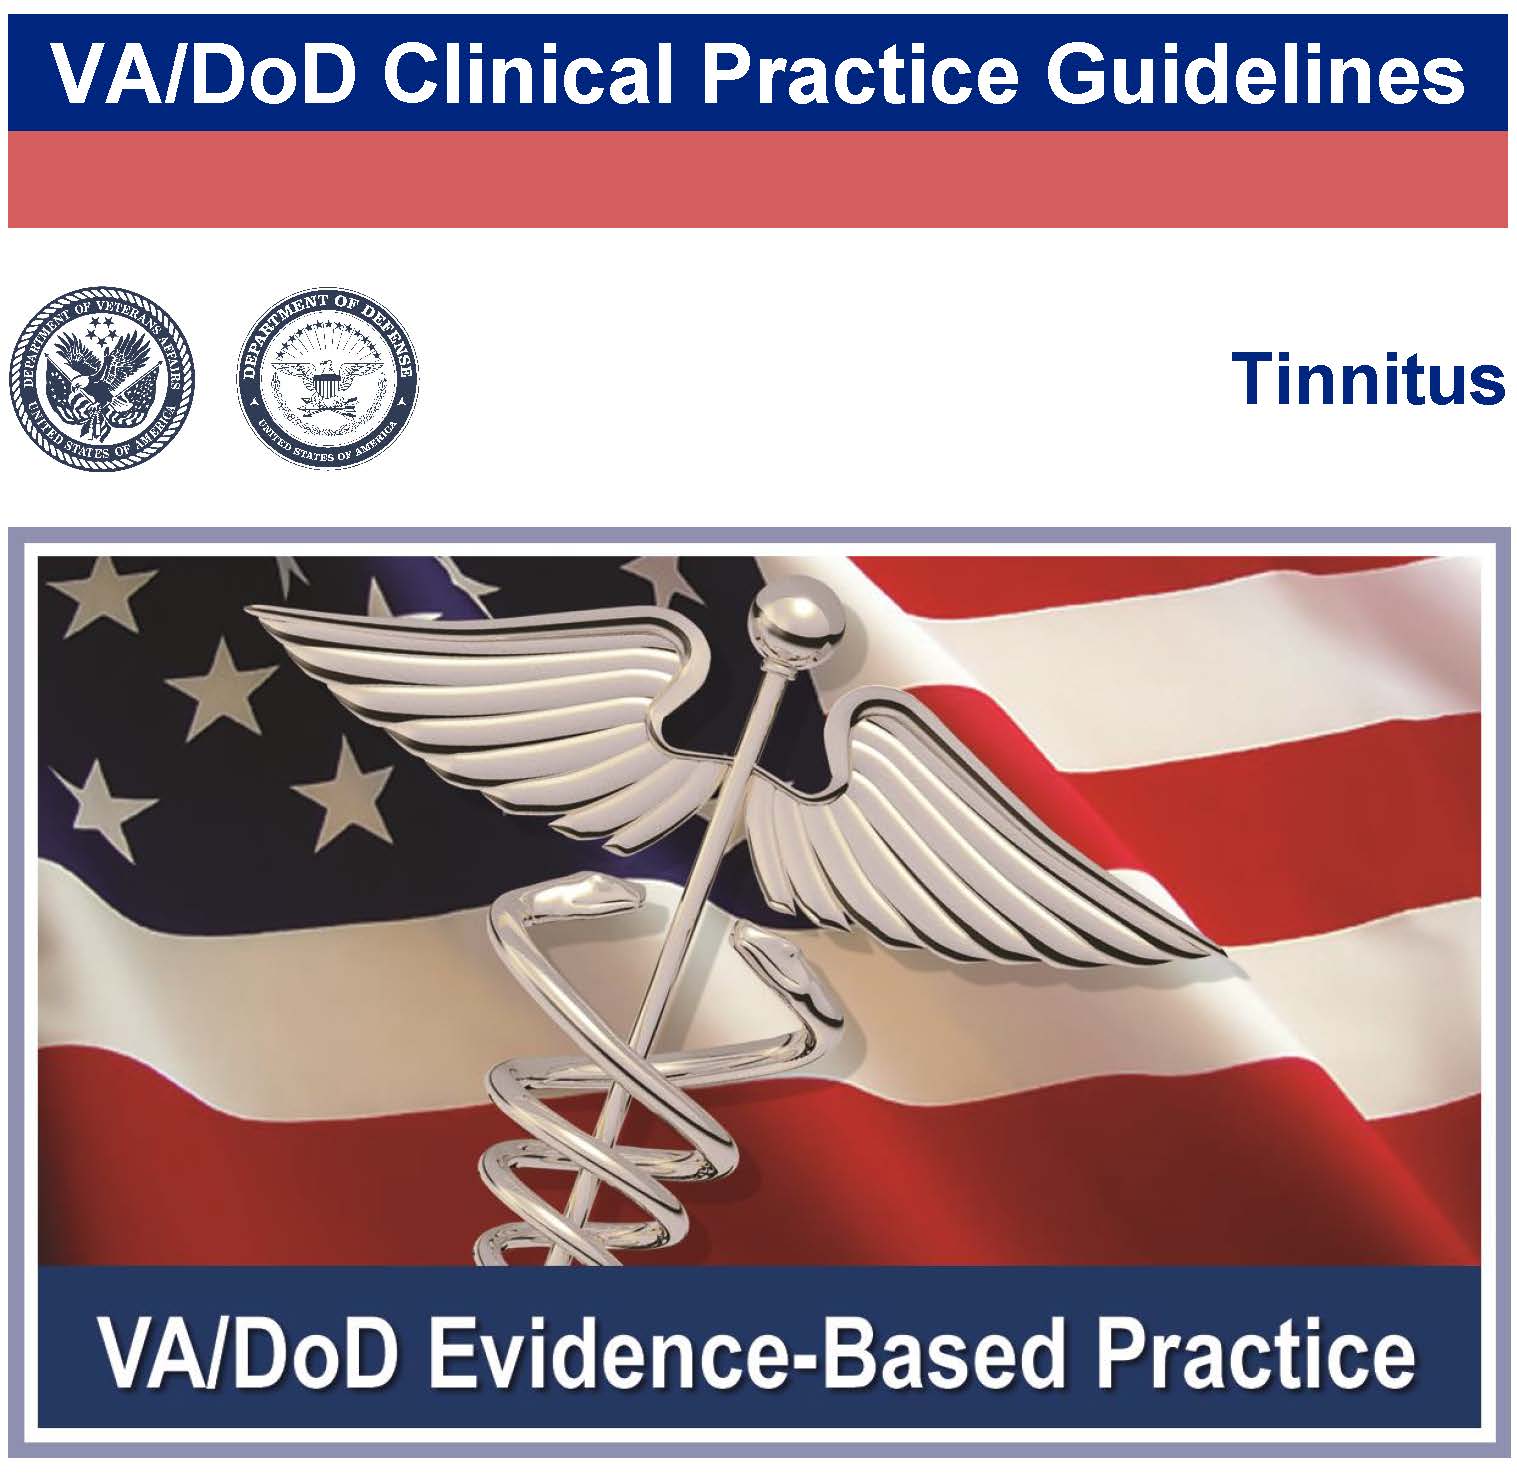 The cover of the VA/DoD Clinical Practice Guideline Tinnitus